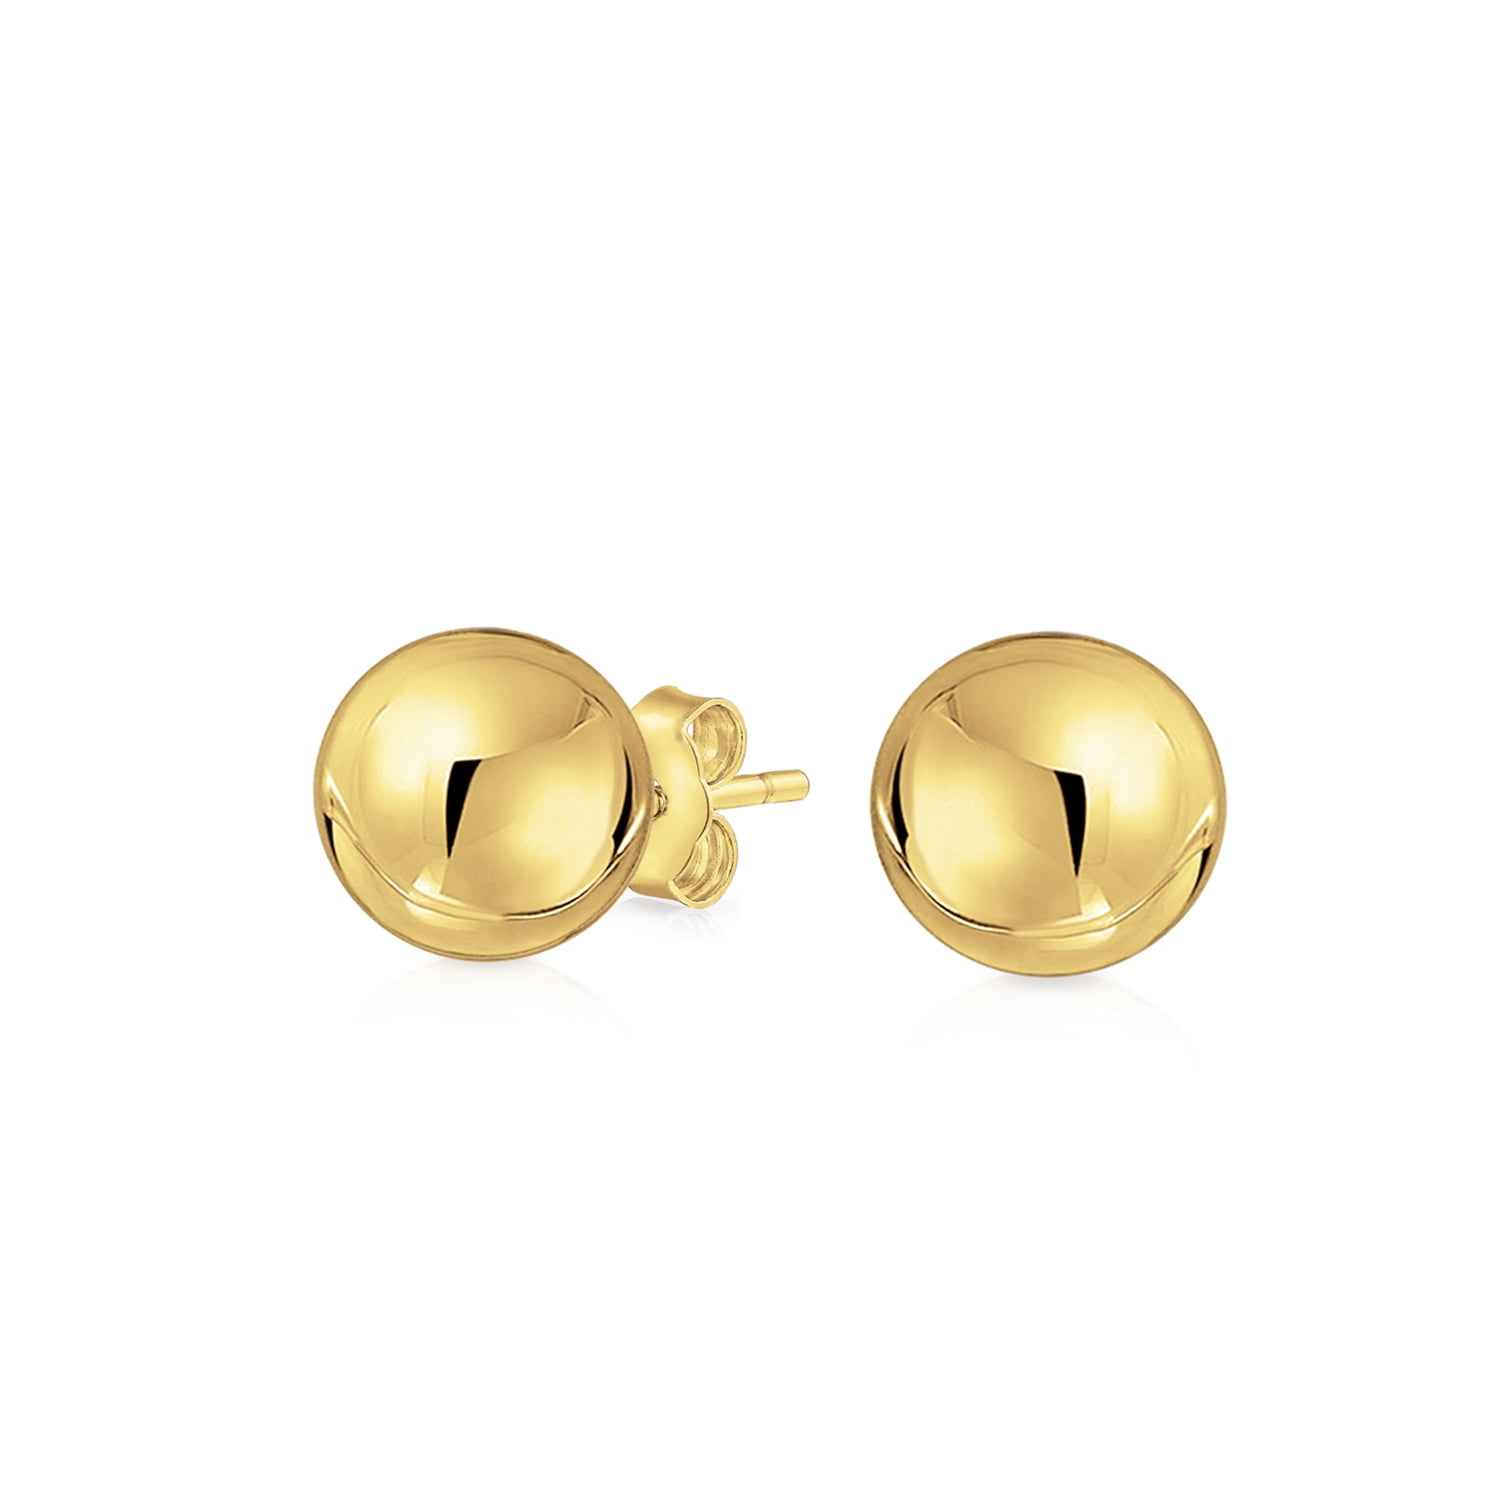 14kt Solid Yellow Gold Stud Earrings Polished Ball Bead Studs 14k 14 kt 